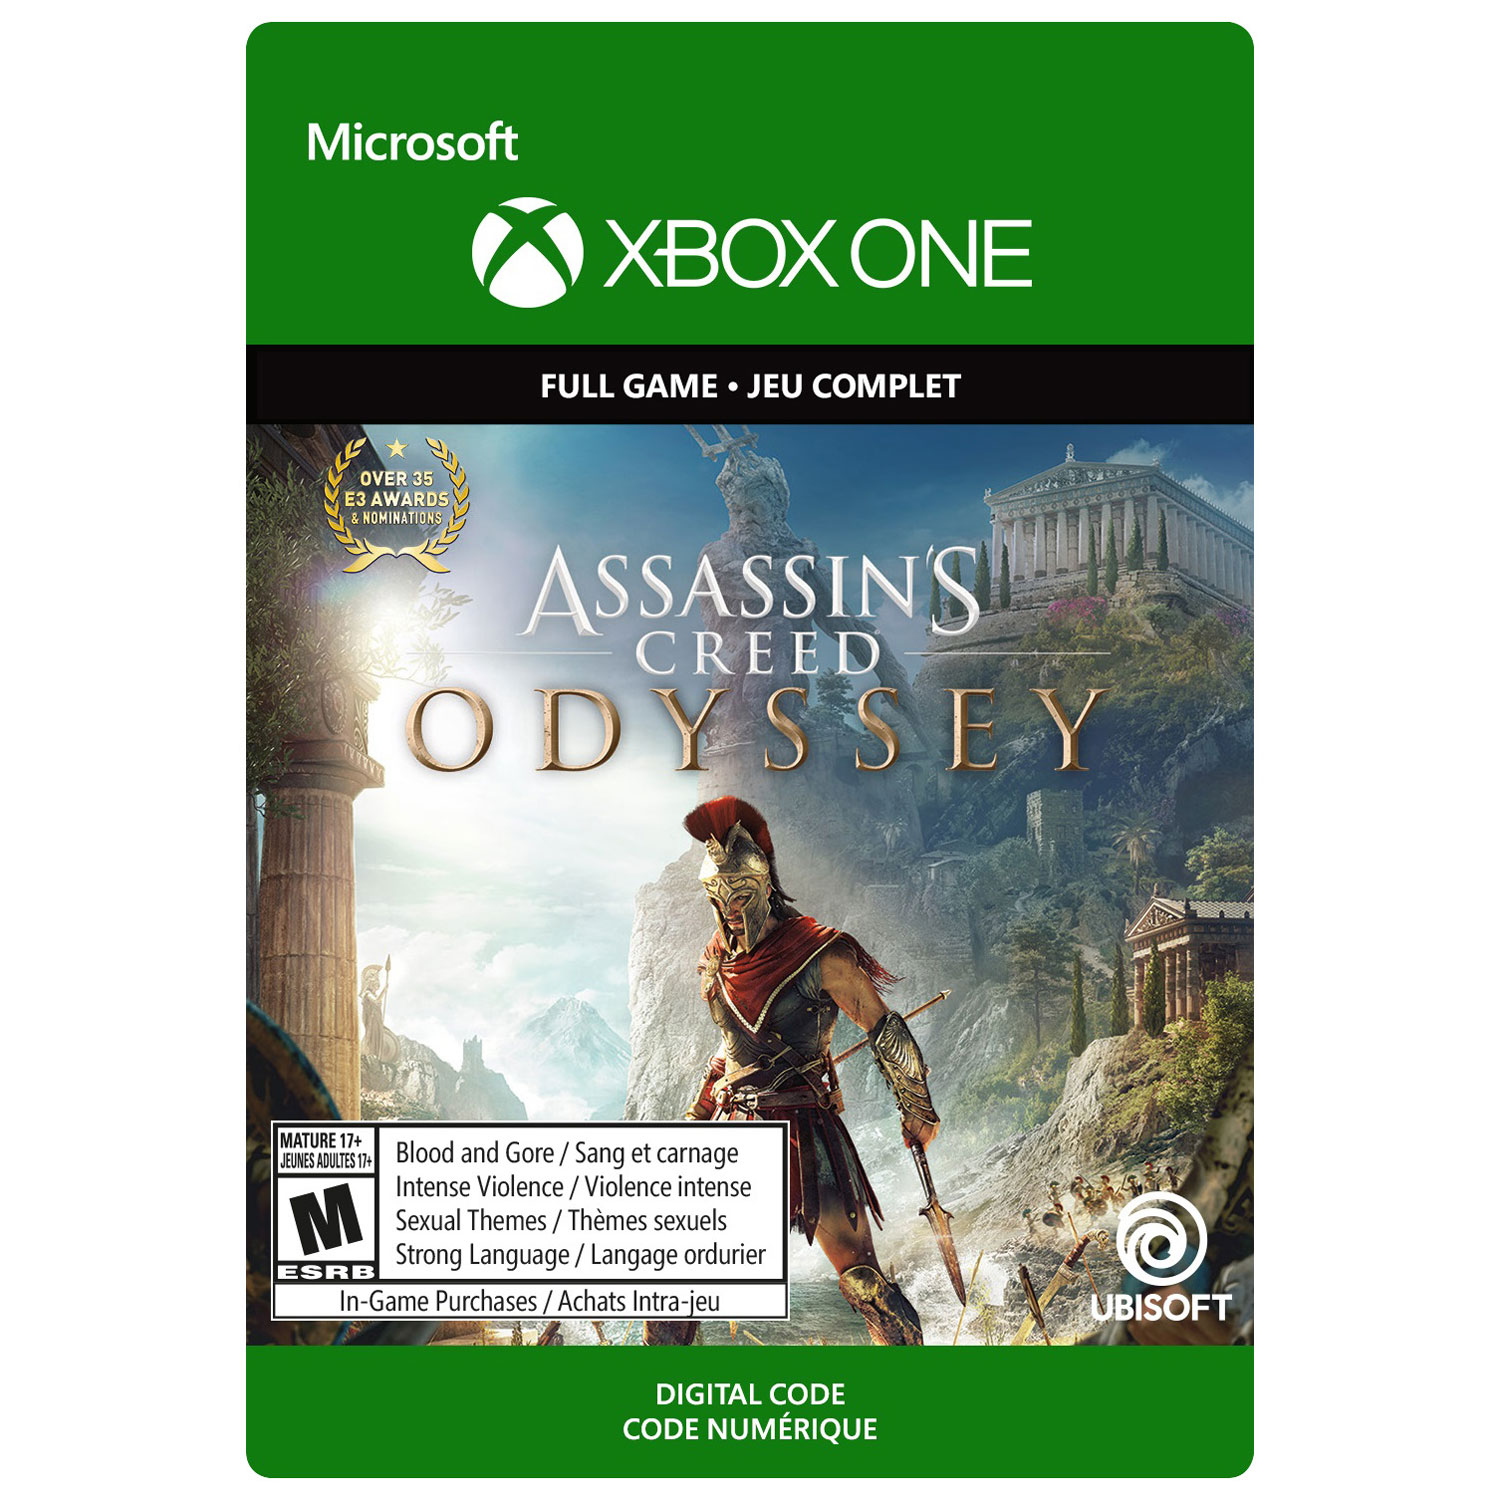 Assassin's Creed Odyssey (Xbox One) - Digital Download